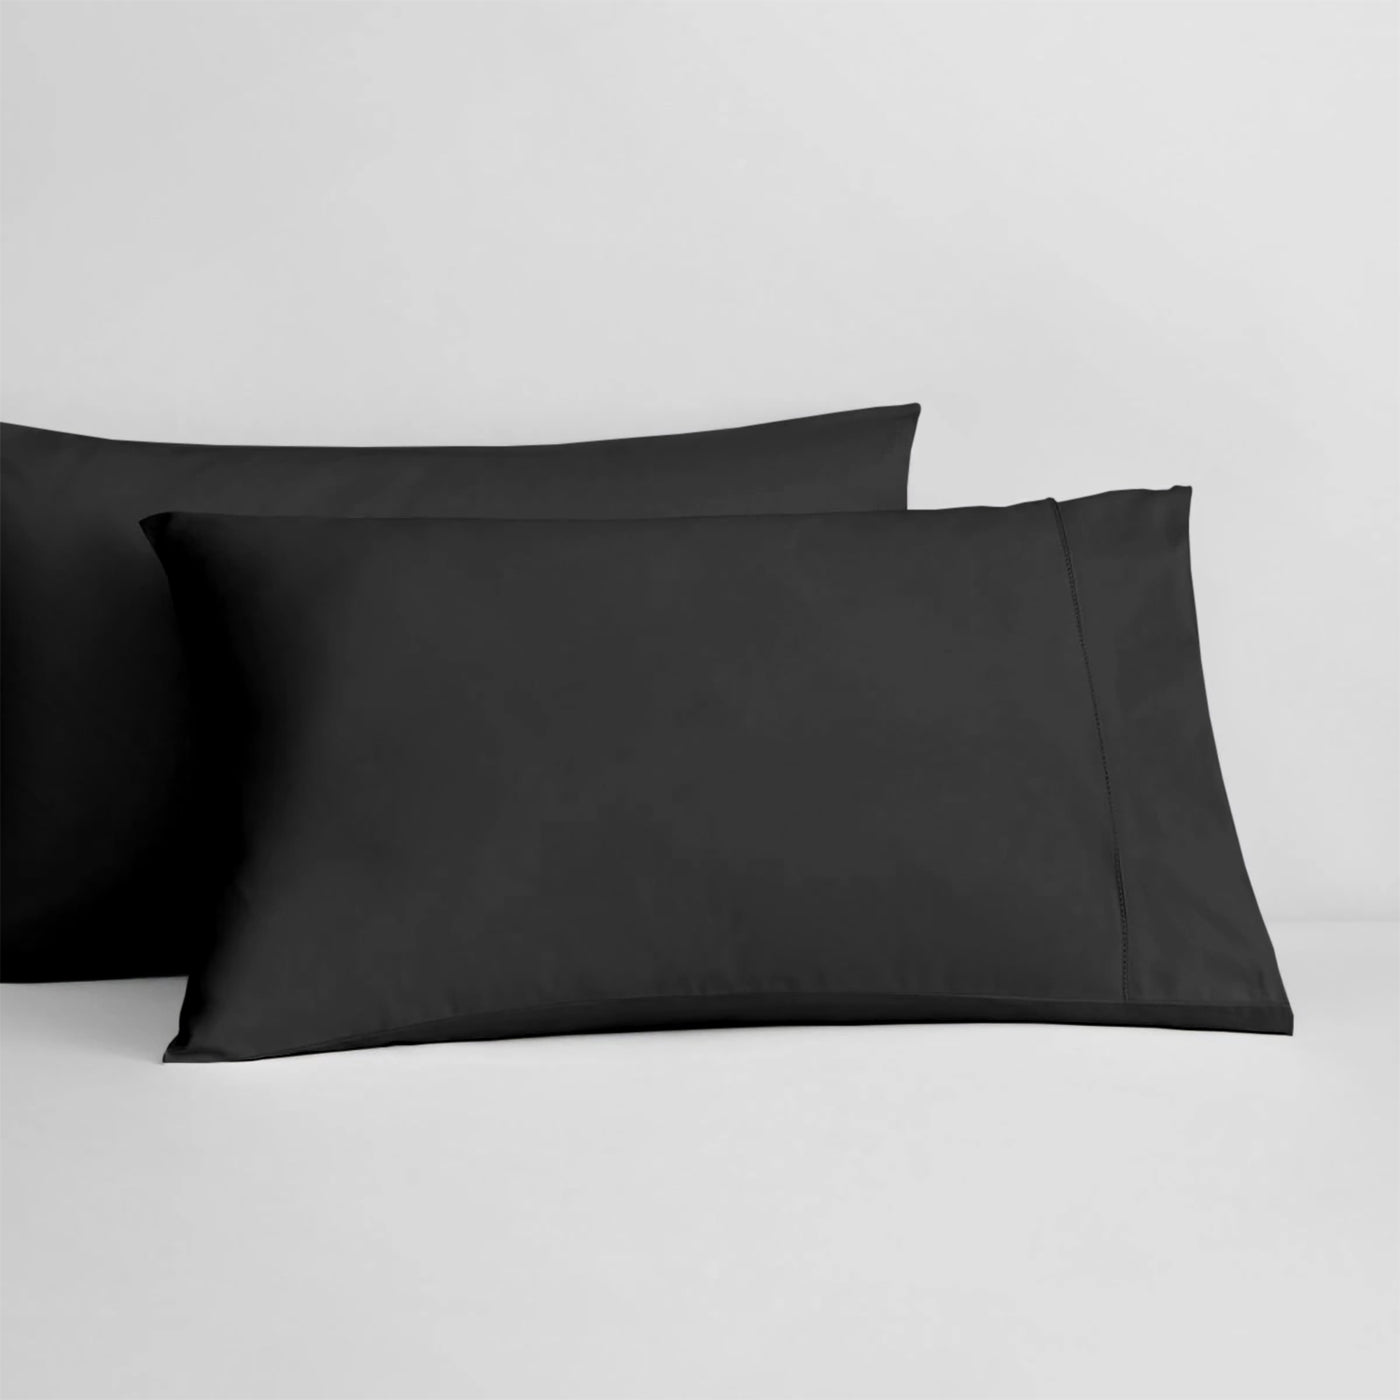 Set of 2 Solid Pillowcases 100% Egyptian Cotton 600 Thread Count